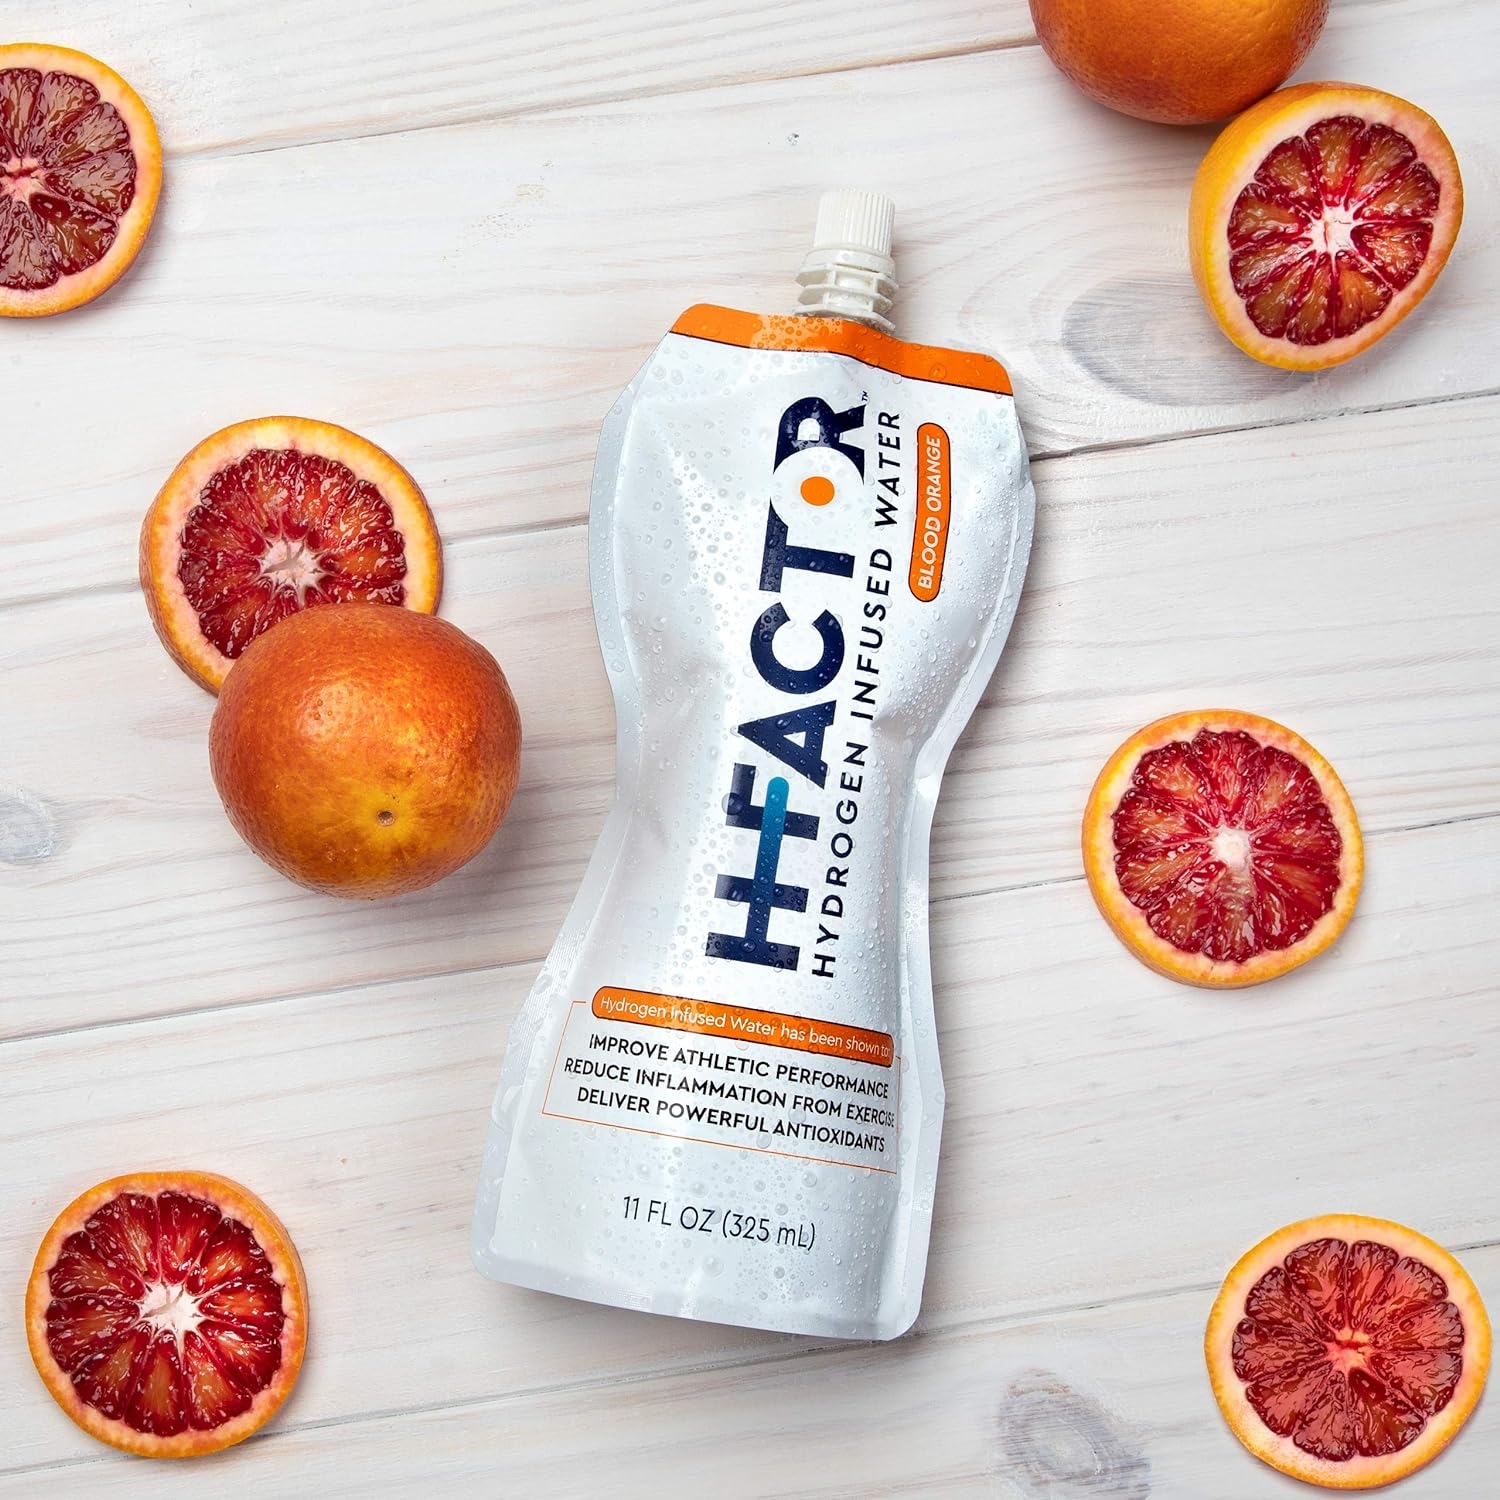 H Factor Flavored Hydrogen Water - Pure Infused Drinking Water for Natural Pre Or Post Workout Recovery, Molecular Hydrogen Supports Athletic Performance, Delivers Antioxidants (Honeydew, 12 Count)…